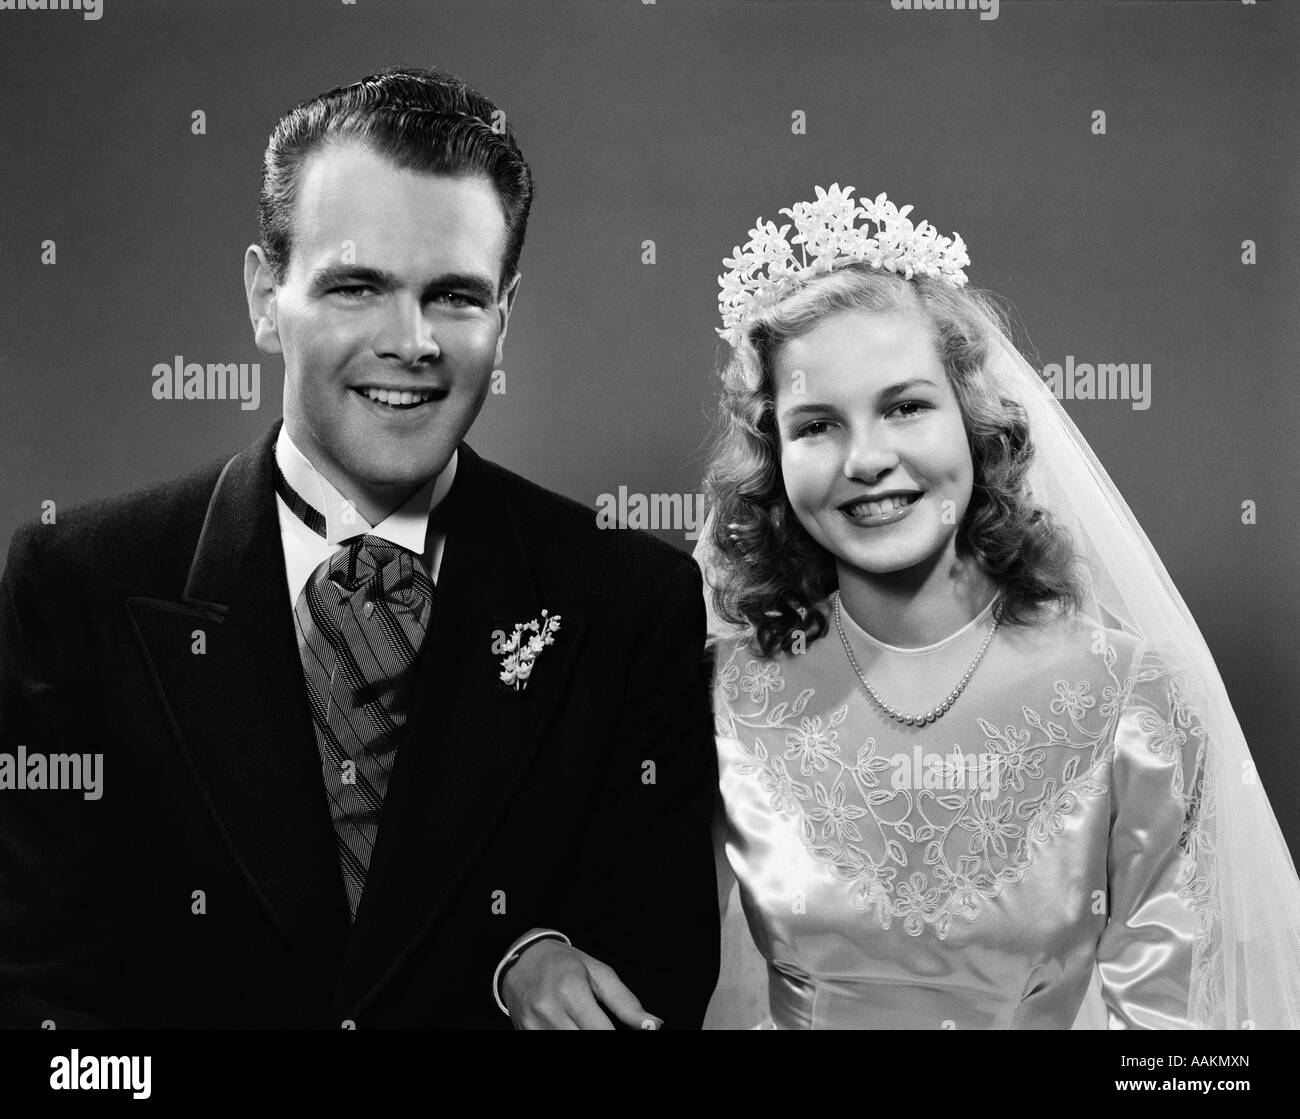 1940s PORTRAIT OF BRIDE AND GROOM LINKED ARM IN ARM LOOKING AT CAMERA Stock Photo